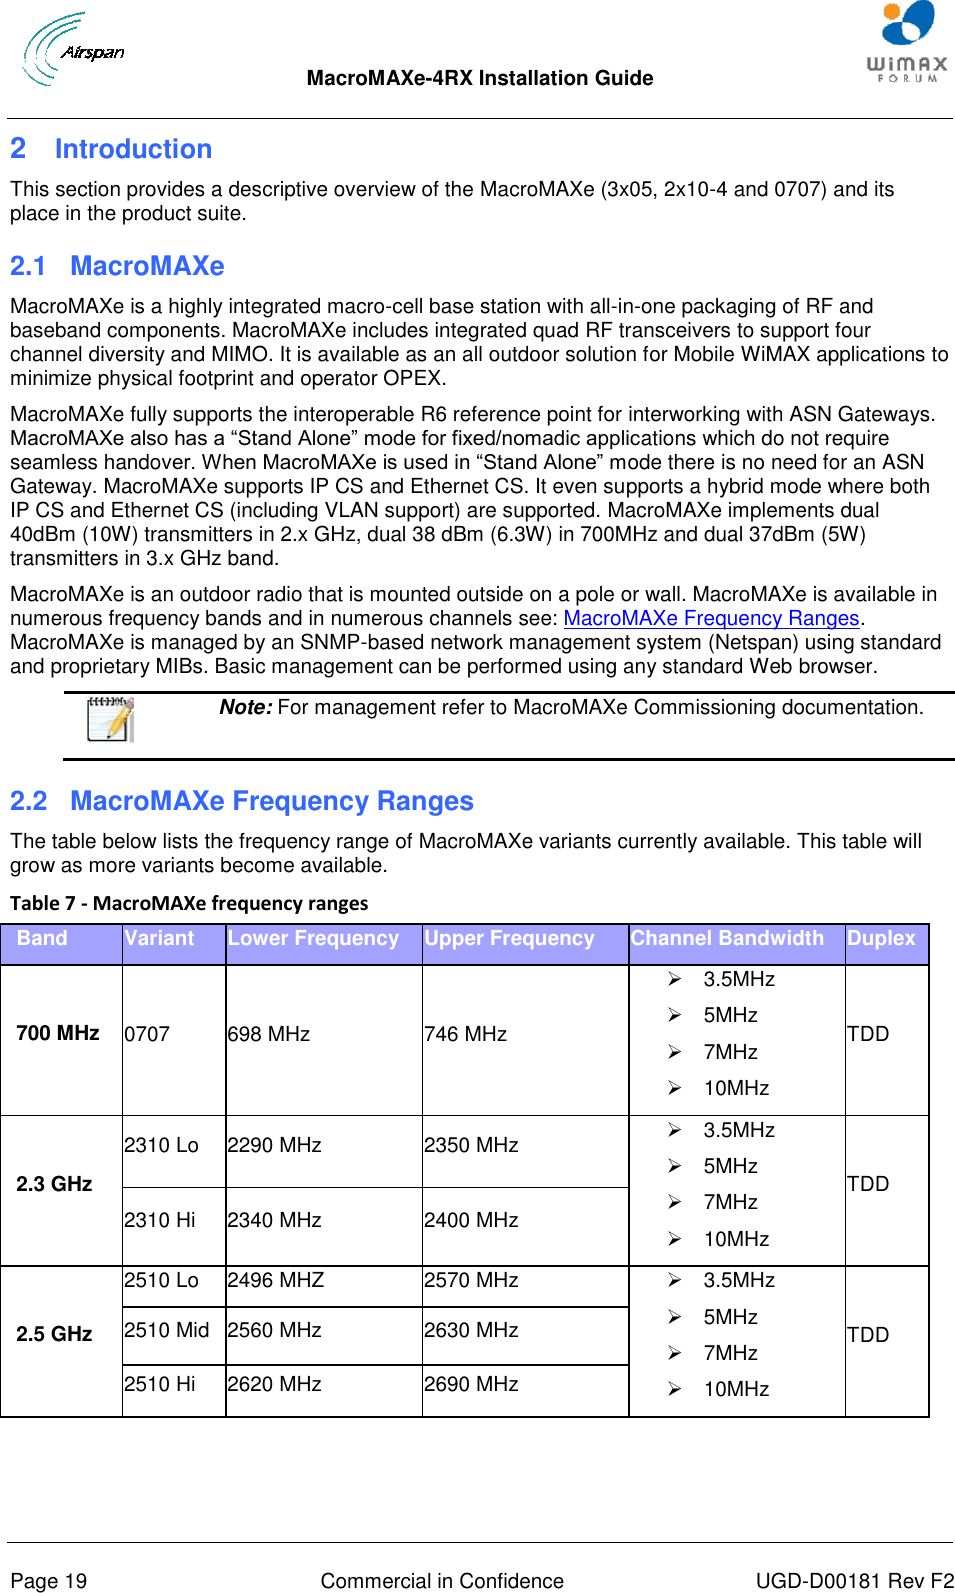  MacroMAXe-4RX Installation Guide       Page 19  Commercial in Confidence  UGD-D00181 Rev F2 2  Introduction This section provides a descriptive overview of the MacroMAXe (3x05, 2x10-4 and 0707) and its place in the product suite. 2.1  MacroMAXe MacroMAXe is a highly integrated macro-cell base station with all-in-one packaging of RF and baseband components. MacroMAXe includes integrated quad RF transceivers to support four channel diversity and MIMO. It is available as an all outdoor solution for Mobile WiMAX applications to minimize physical footprint and operator OPEX. MacroMAXe fully supports the interoperable R6 reference point for interworking with ASN Gateways. MacroMAXe also has a “Stand Alone” mode for fixed/nomadic applications which do not require seamless handover. When MacroMAXe is used in “Stand Alone” mode there is no need for an ASN Gateway. MacroMAXe supports IP CS and Ethernet CS. It even supports a hybrid mode where both IP CS and Ethernet CS (including VLAN support) are supported. MacroMAXe implements dual 40dBm (10W) transmitters in 2.x GHz, dual 38 dBm (6.3W) in 700MHz and dual 37dBm (5W) transmitters in 3.x GHz band. MacroMAXe is an outdoor radio that is mounted outside on a pole or wall. MacroMAXe is available in numerous frequency bands and in numerous channels see: MacroMAXe Frequency Ranges.MacroMAXe is managed by an SNMP-based network management system (Netspan) using standard and proprietary MIBs. Basic management can be performed using any standard Web browser.  Note: For management refer to MacroMAXe Commissioning documentation. 2.2  MacroMAXe Frequency Ranges The table below lists the frequency range of MacroMAXe variants currently available. This table will grow as more variants become available. Table 7 - MacroMAXe frequency ranges Band Variant Lower Frequency Upper Frequency Channel Bandwidth Duplex 700 MHz 0707 698 MHz 746 MHz   3.5MHz   5MHz   7MHz   10MHz TDD 2.3 GHz 2310 Lo 2290 MHz 2350 MHz   3.5MHz   5MHz   7MHz   10MHz TDD 2310 Hi 2340 MHz 2400 MHz 2.5 GHz 2510 Lo 2496 MHZ 2570 MHz   3.5MHz   5MHz   7MHz   10MHz TDD 2510 Mid 2560 MHz 2630 MHz 2510 Hi 2620 MHz 2690 MHz 